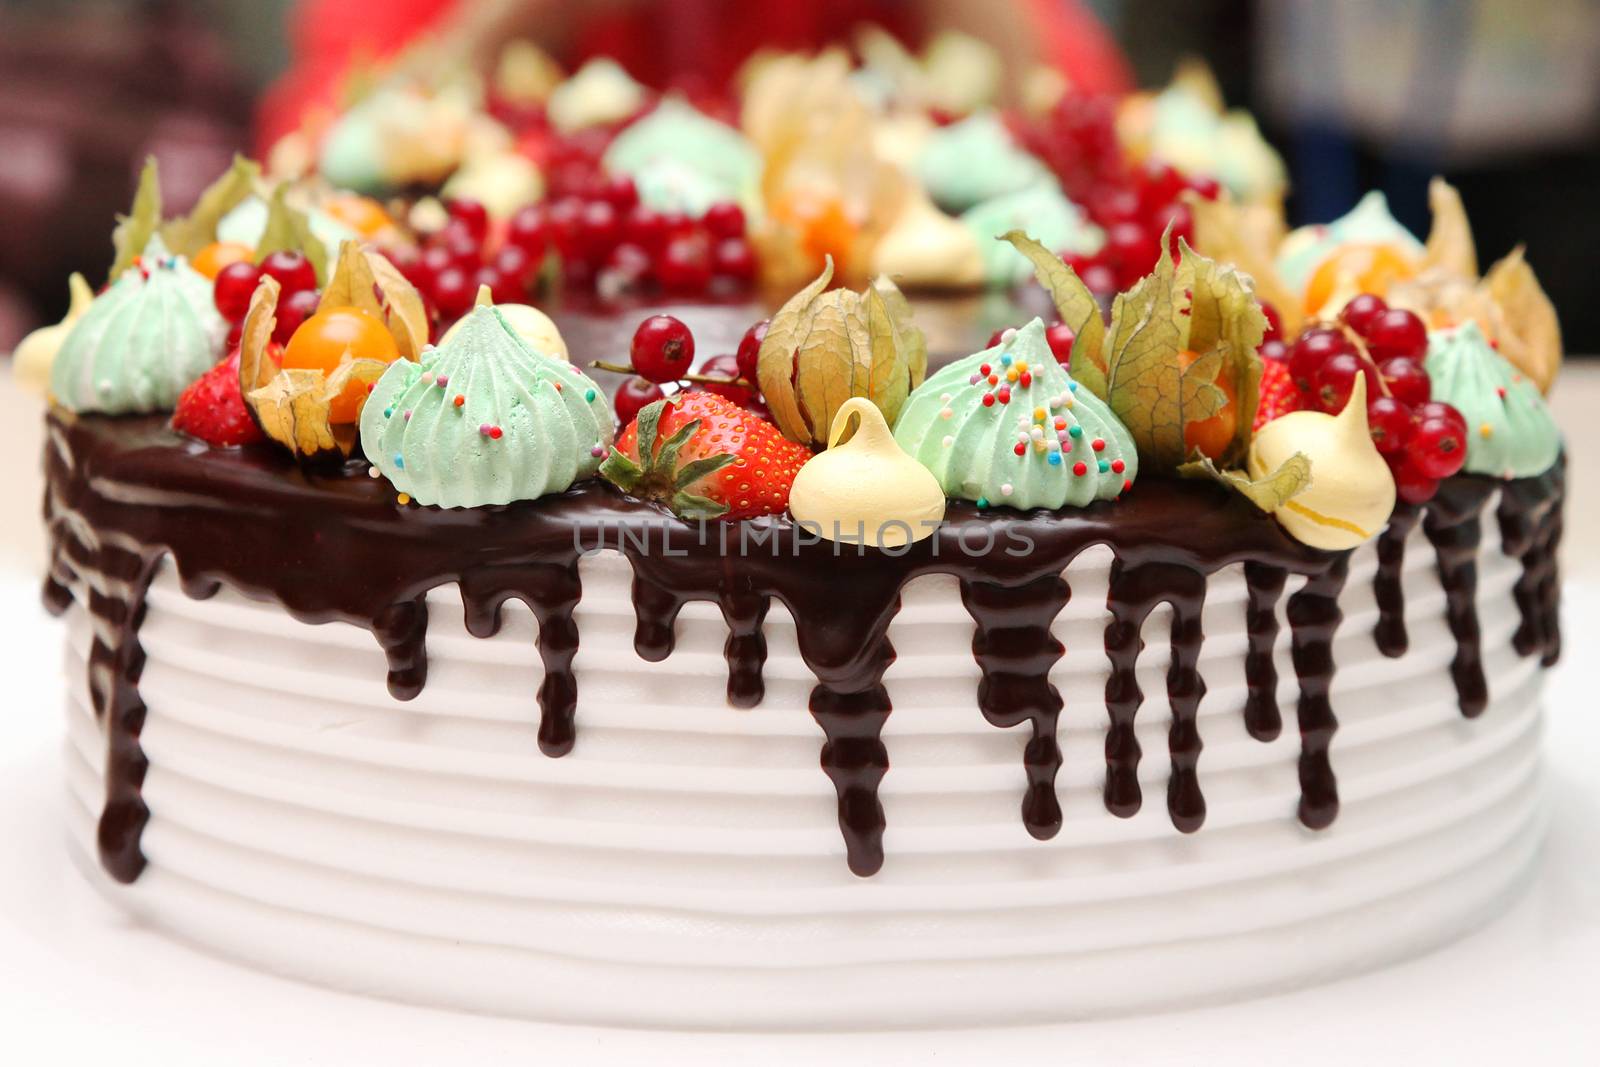 Delicious and beautiful cake